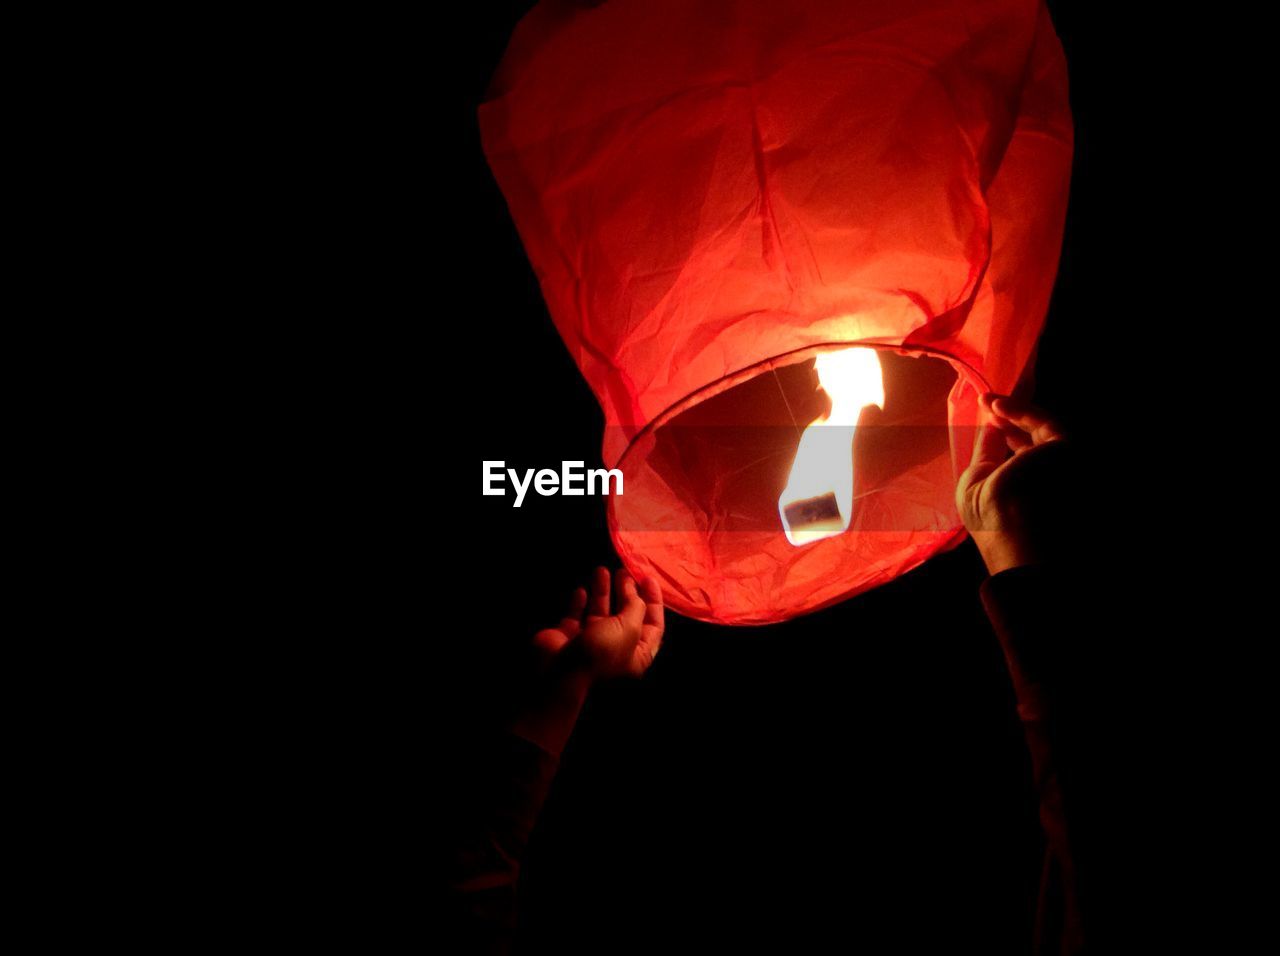 Cropped image of hands releasing lantern in sky at night